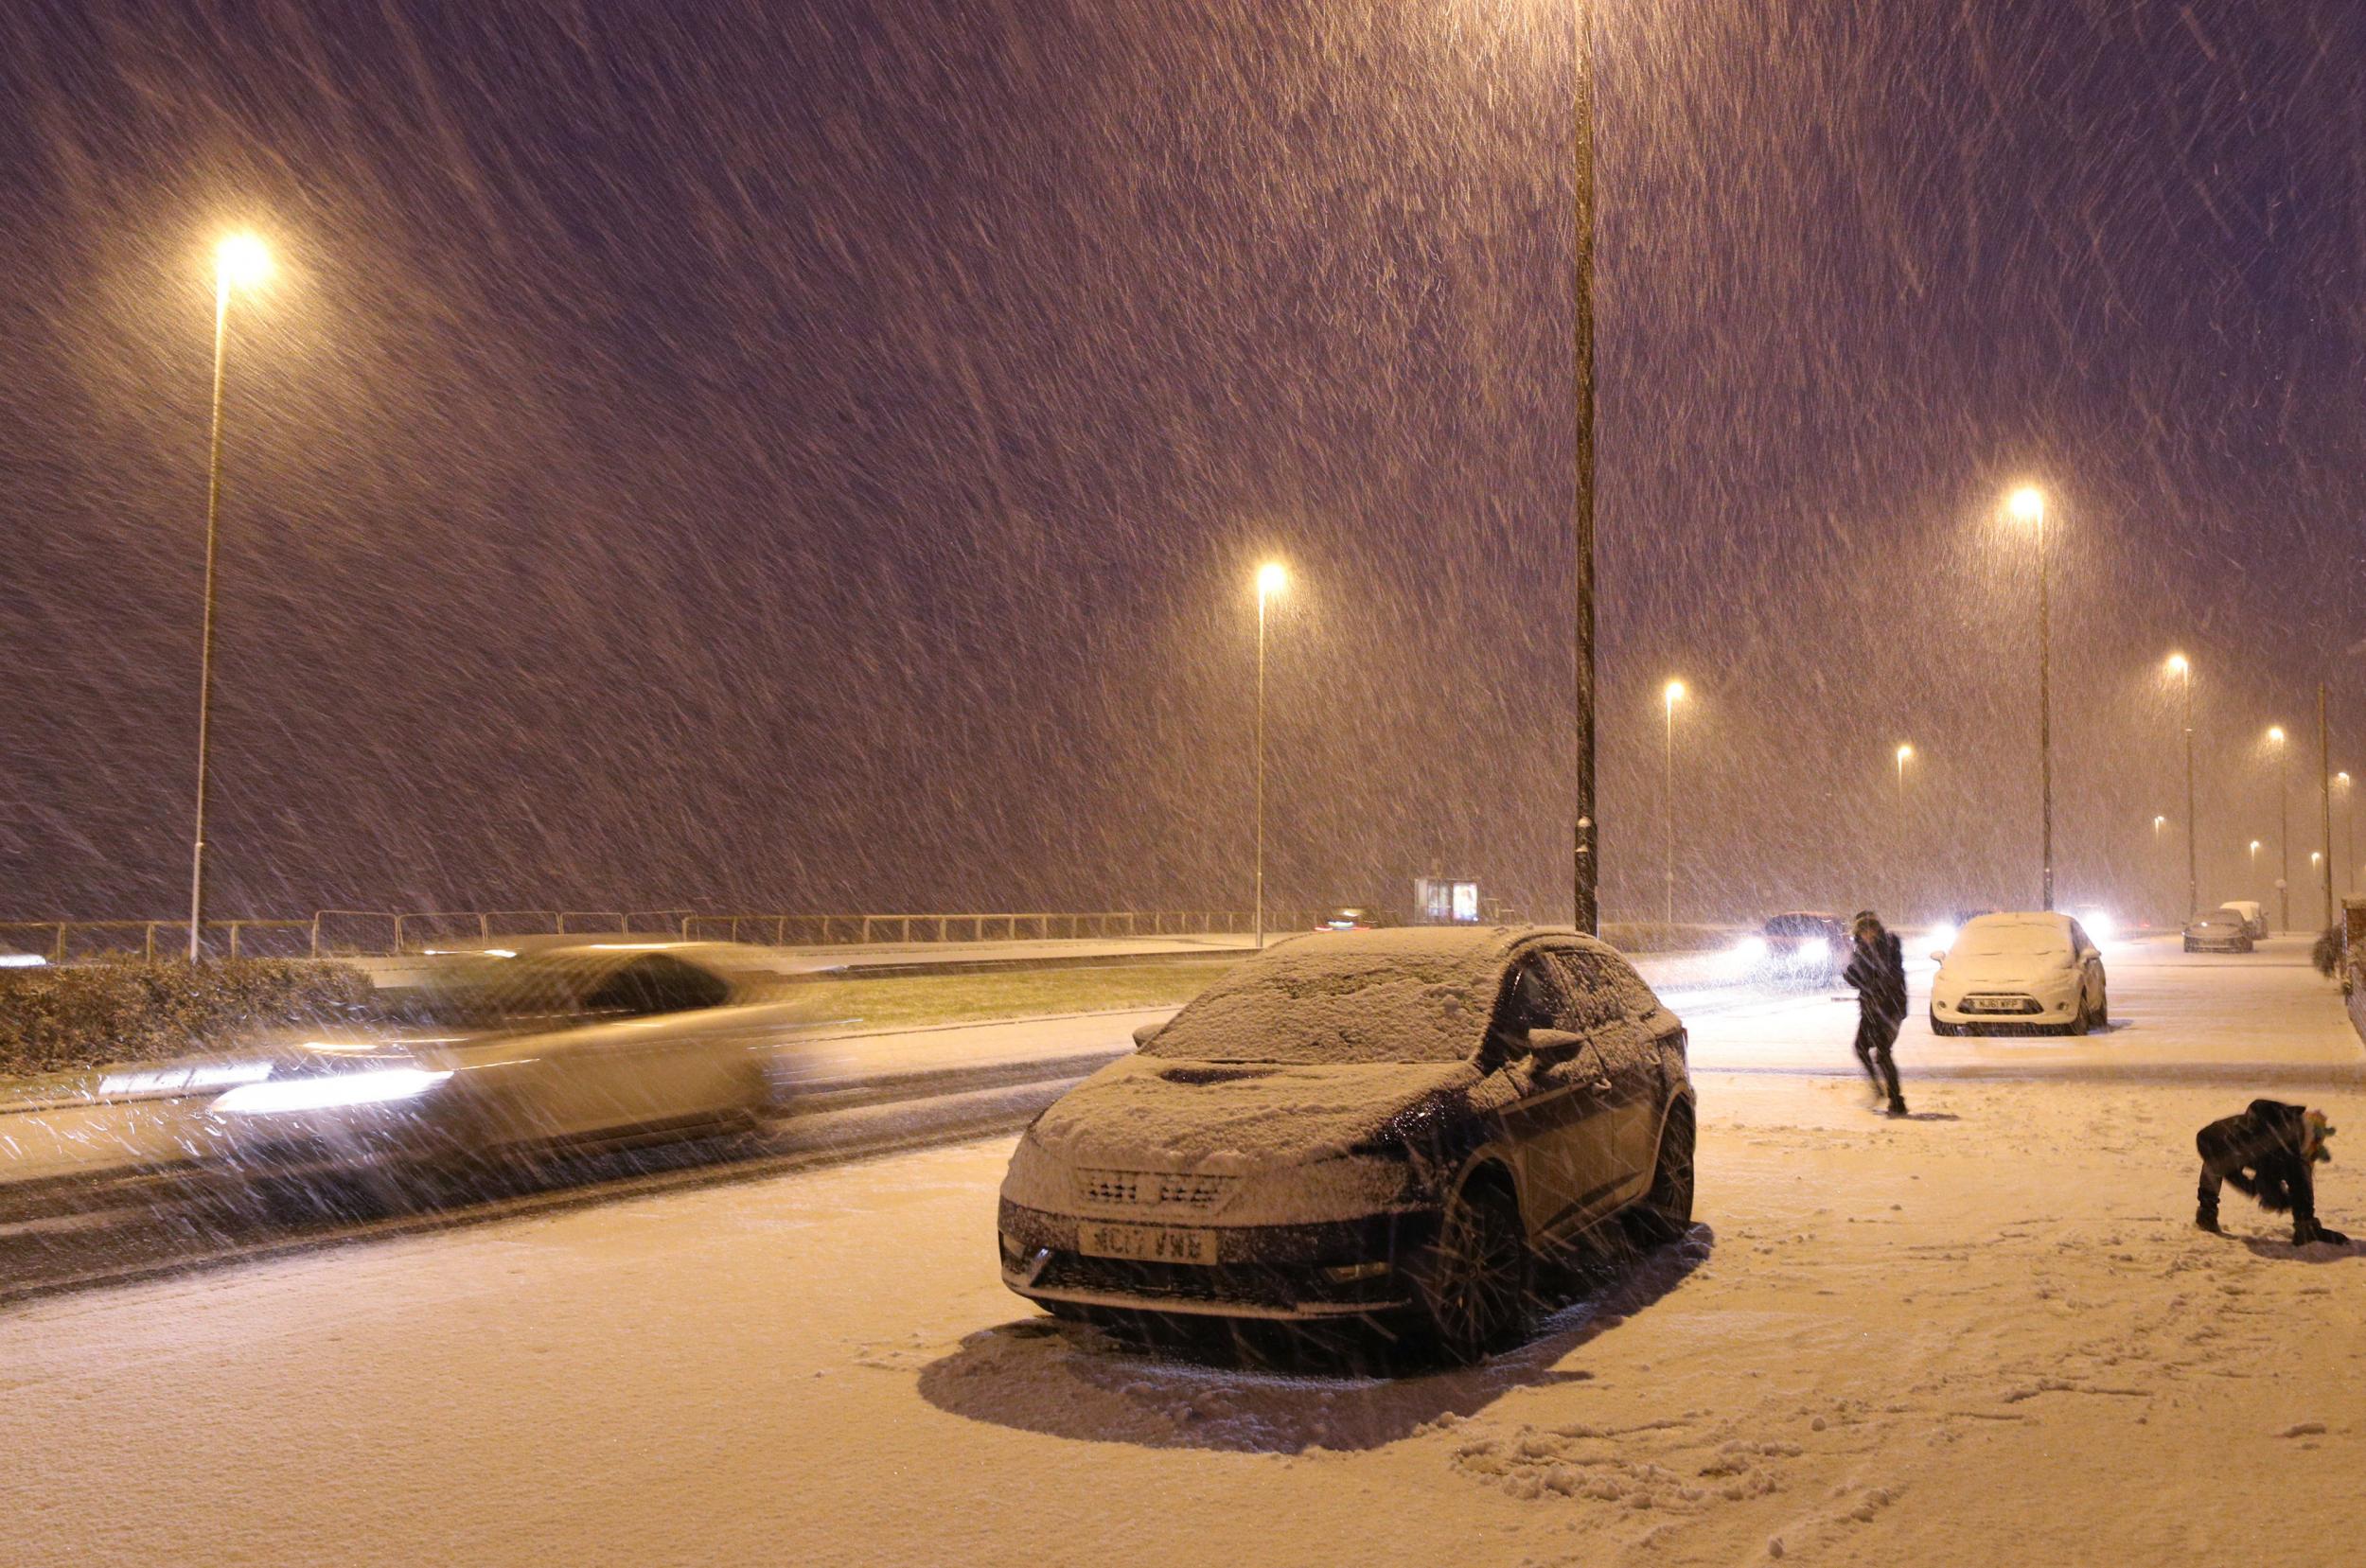 Falling snow in Whiltey Bay, as heavy snowfall across parts of the UK is causing widespread disruption, closing roads and grounding flights at an airport